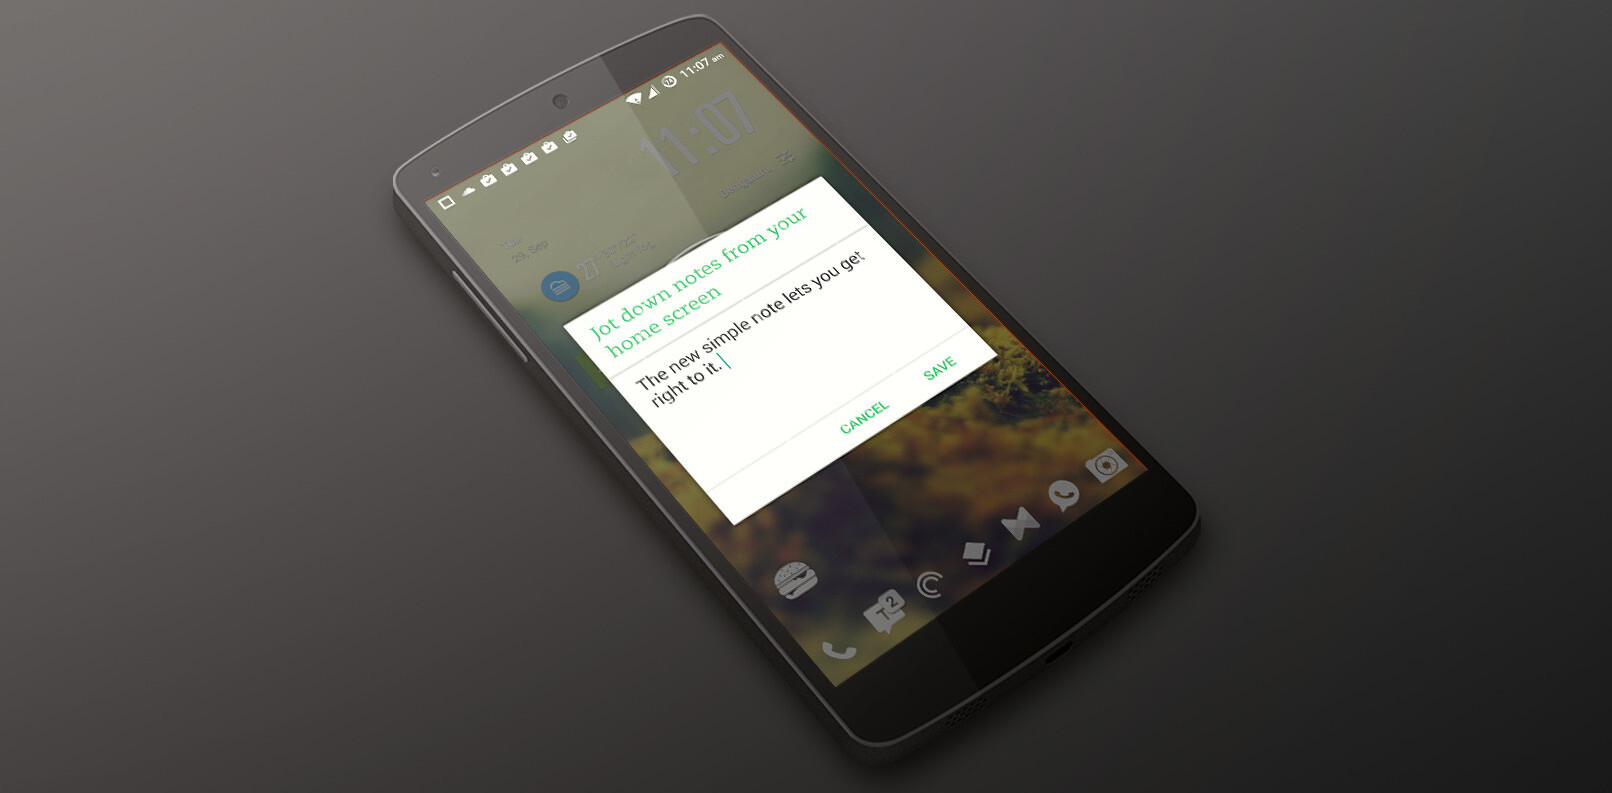 Evernote for Android now lets you jot down thoughts right from your home screen